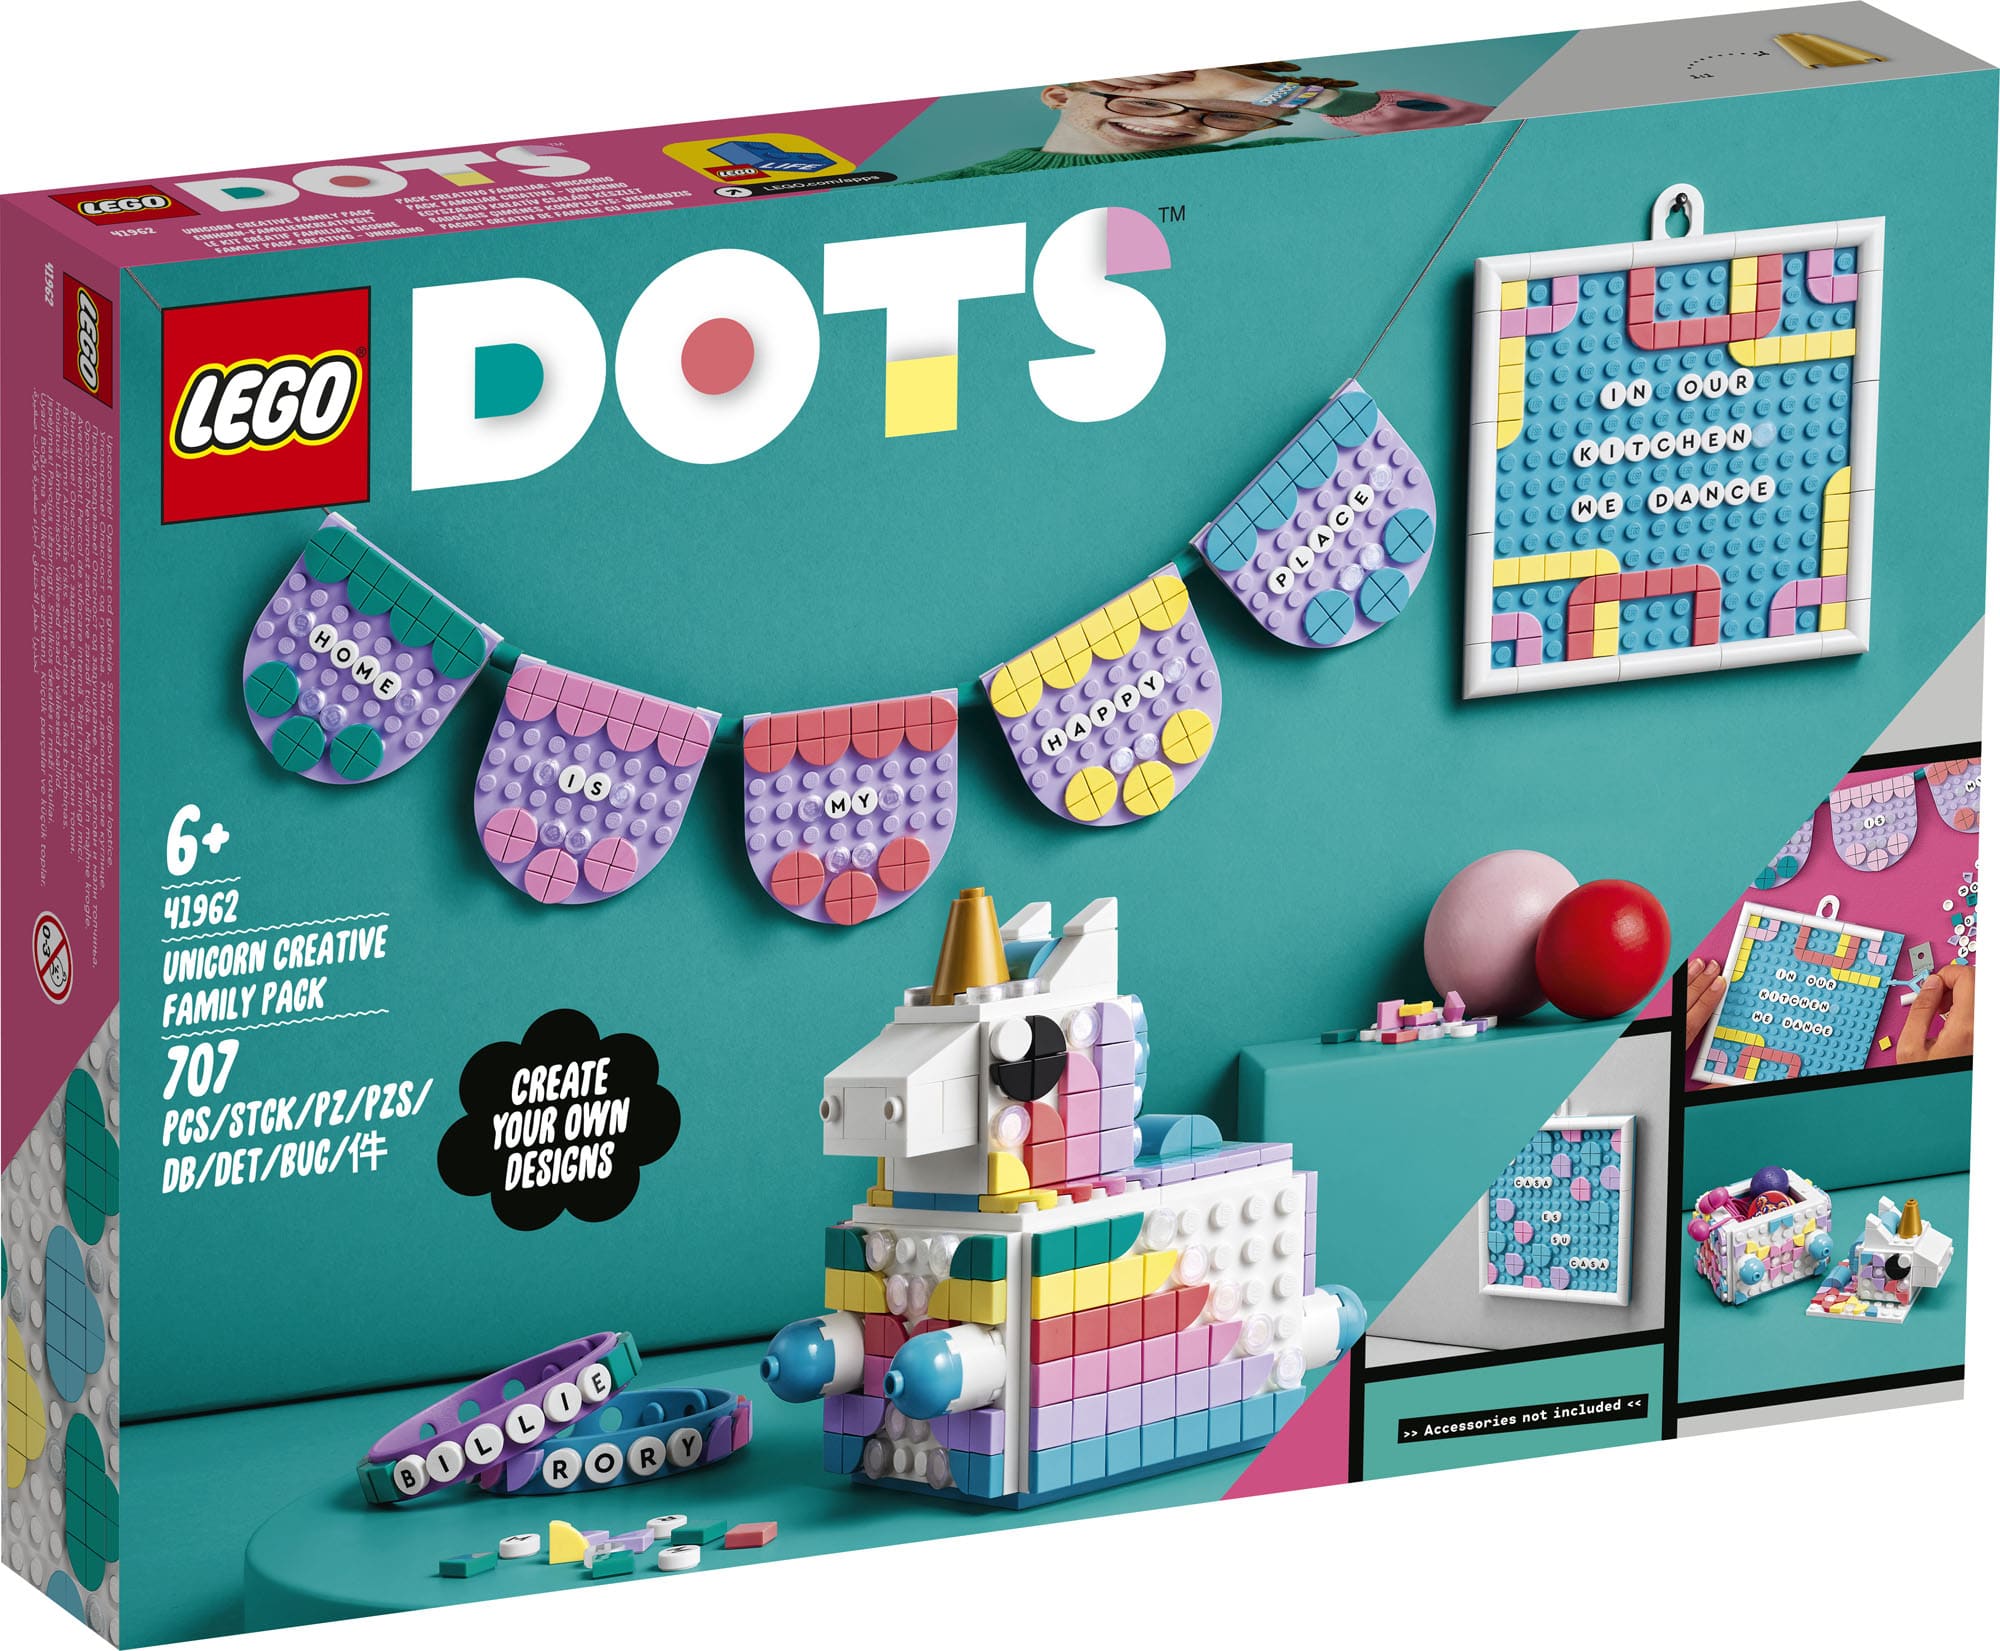 LEGO DOTS summer 2020 sets now available [News] - The Brothers Brick